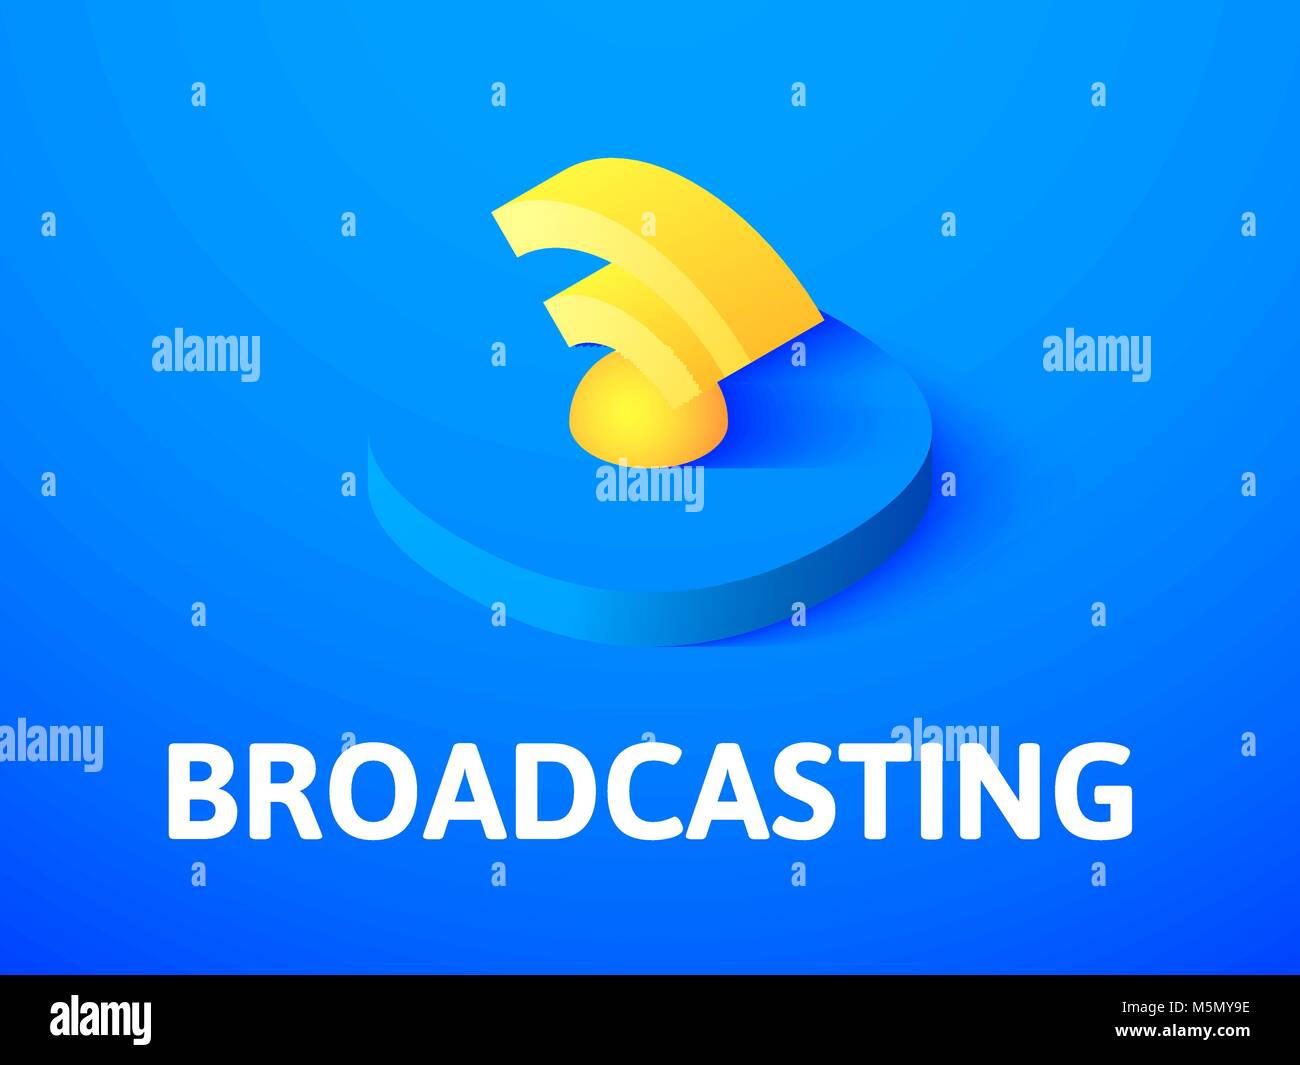 Broadcasting isometric icon, isolated on color background Stock Vector